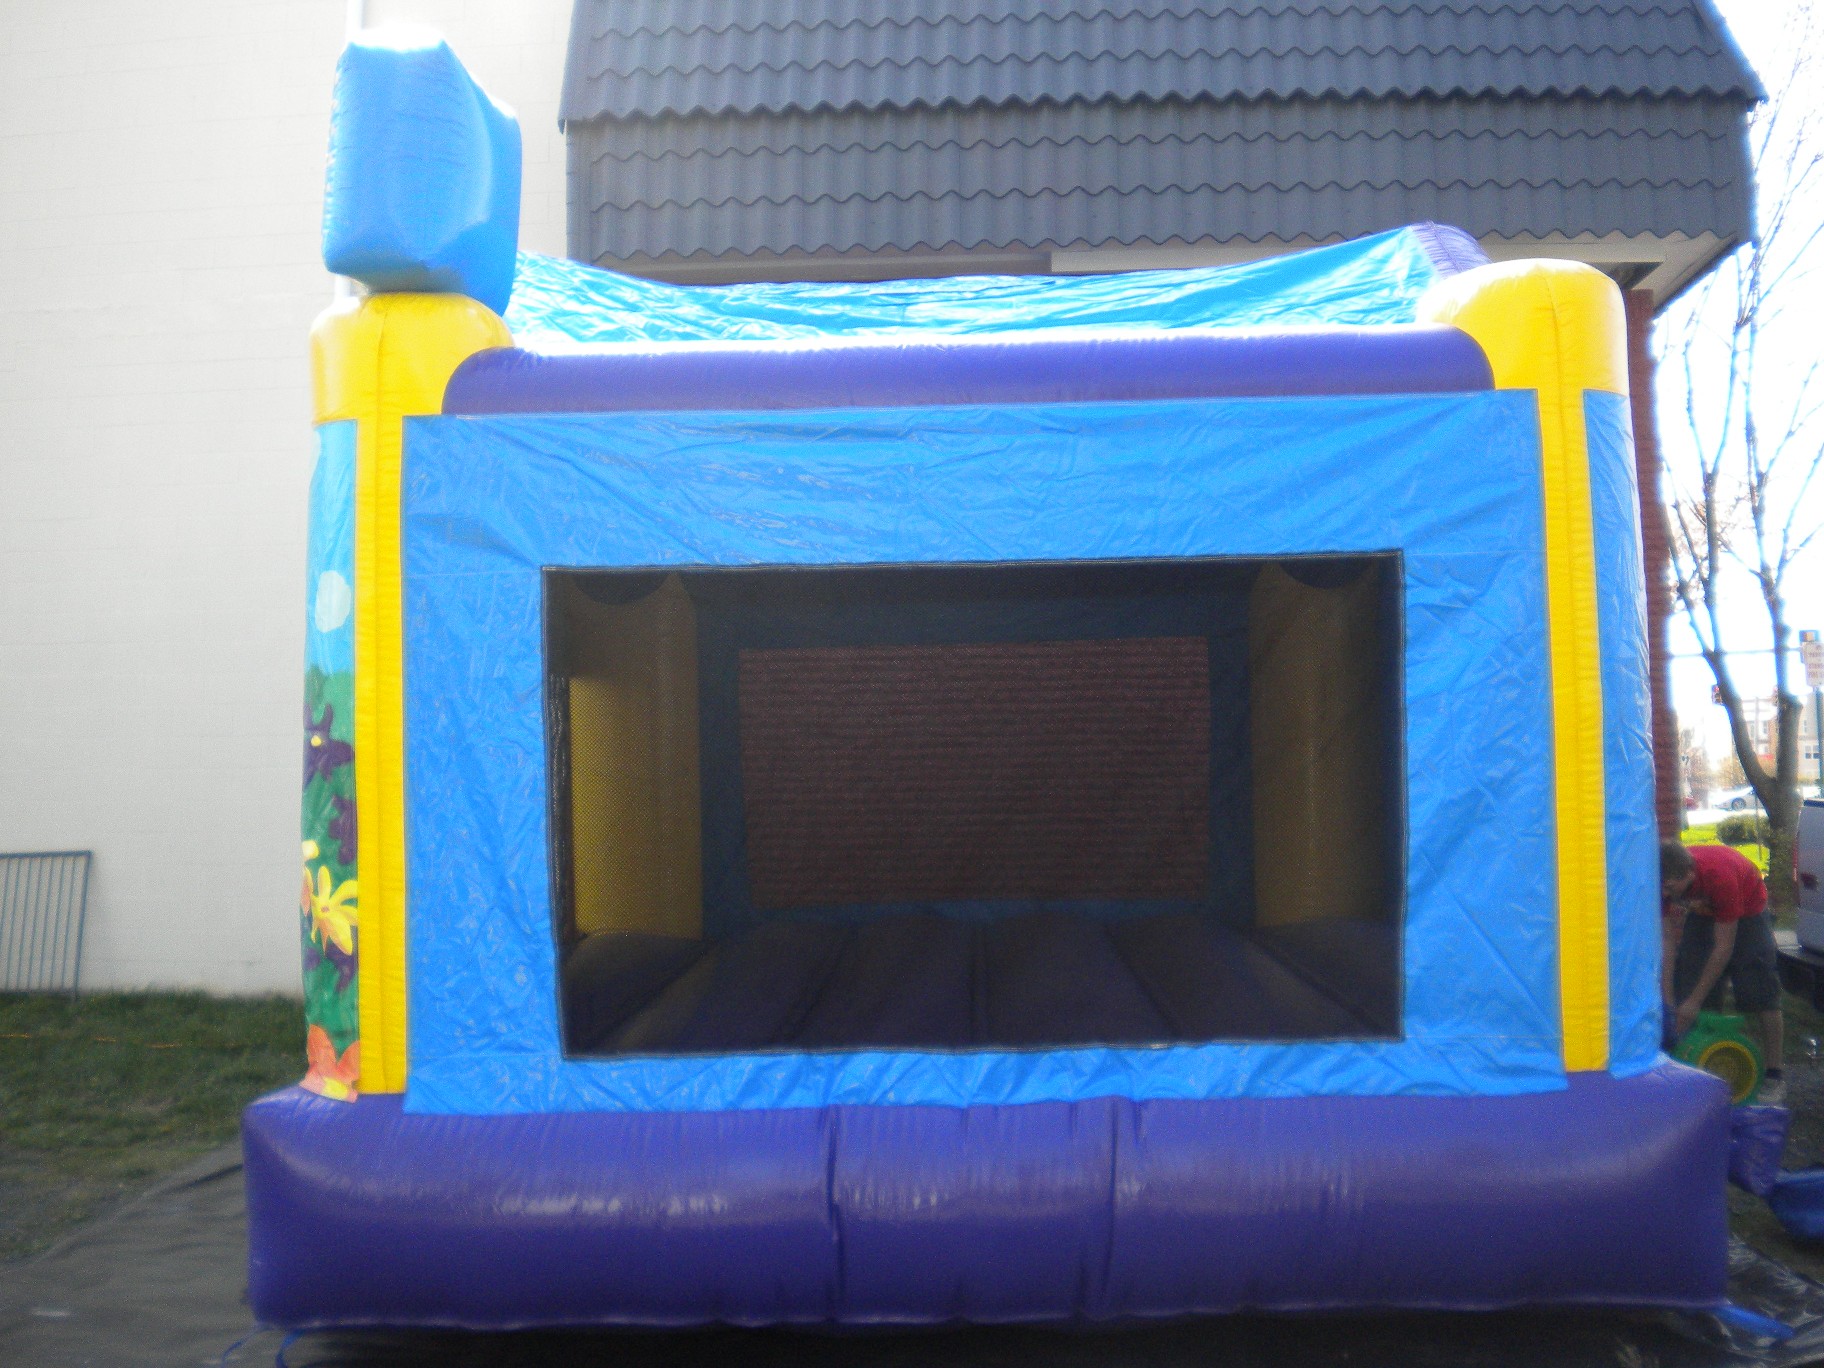 Dora the Explorer Jumper Moonbounce Bounce House Right Side View